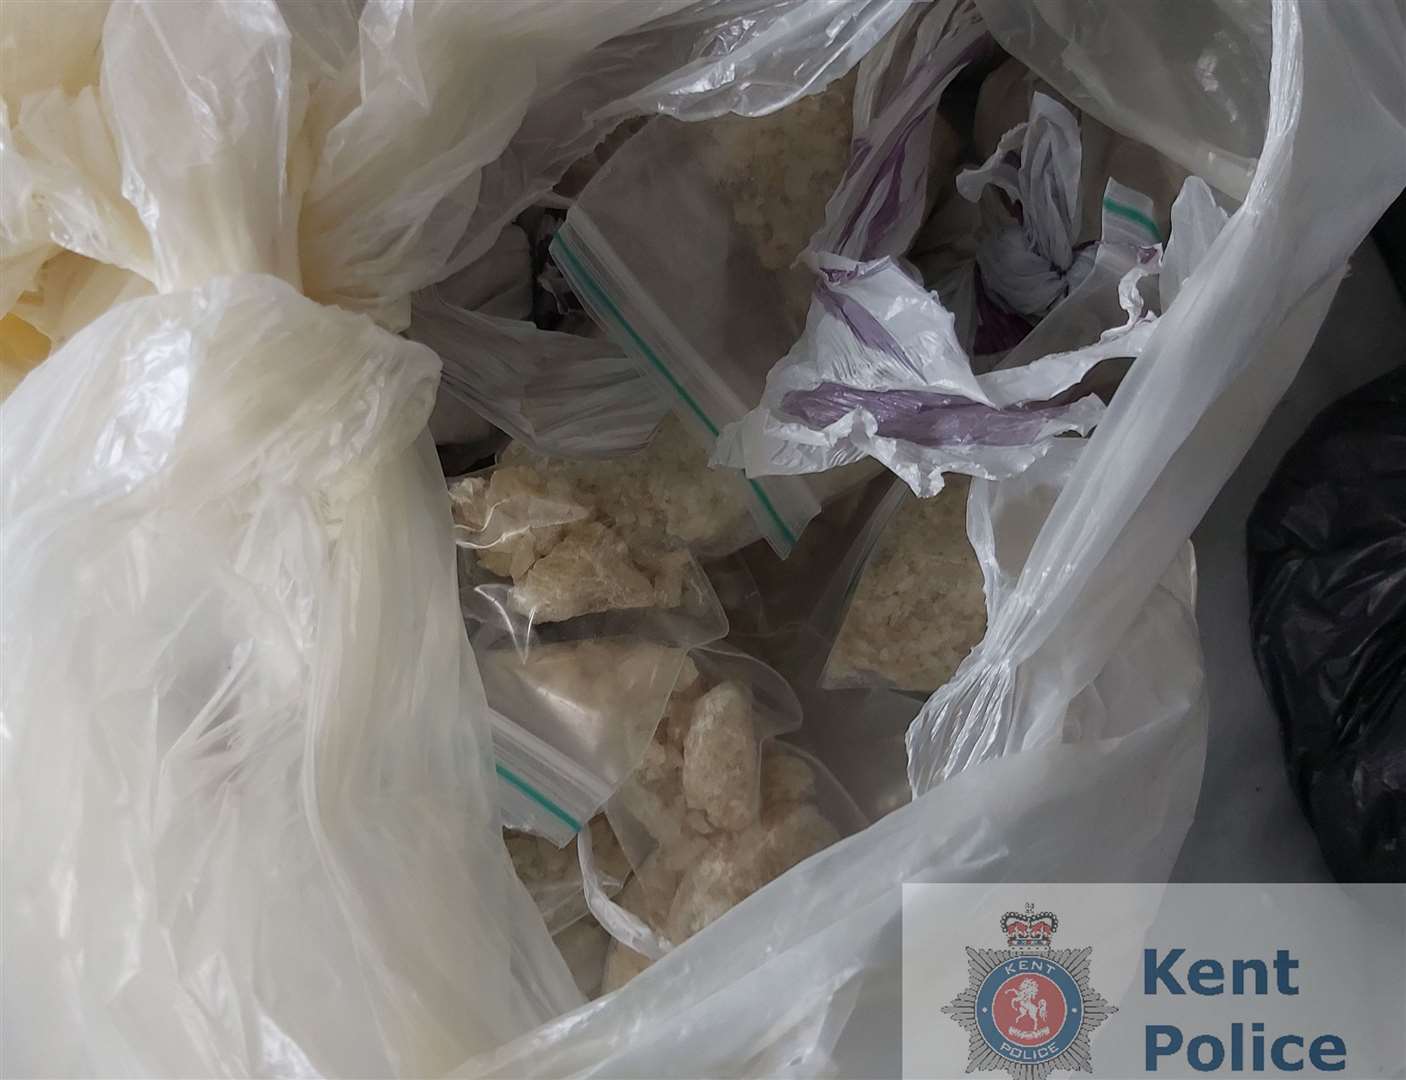 Drugs were also seized. Picture: Kent Police